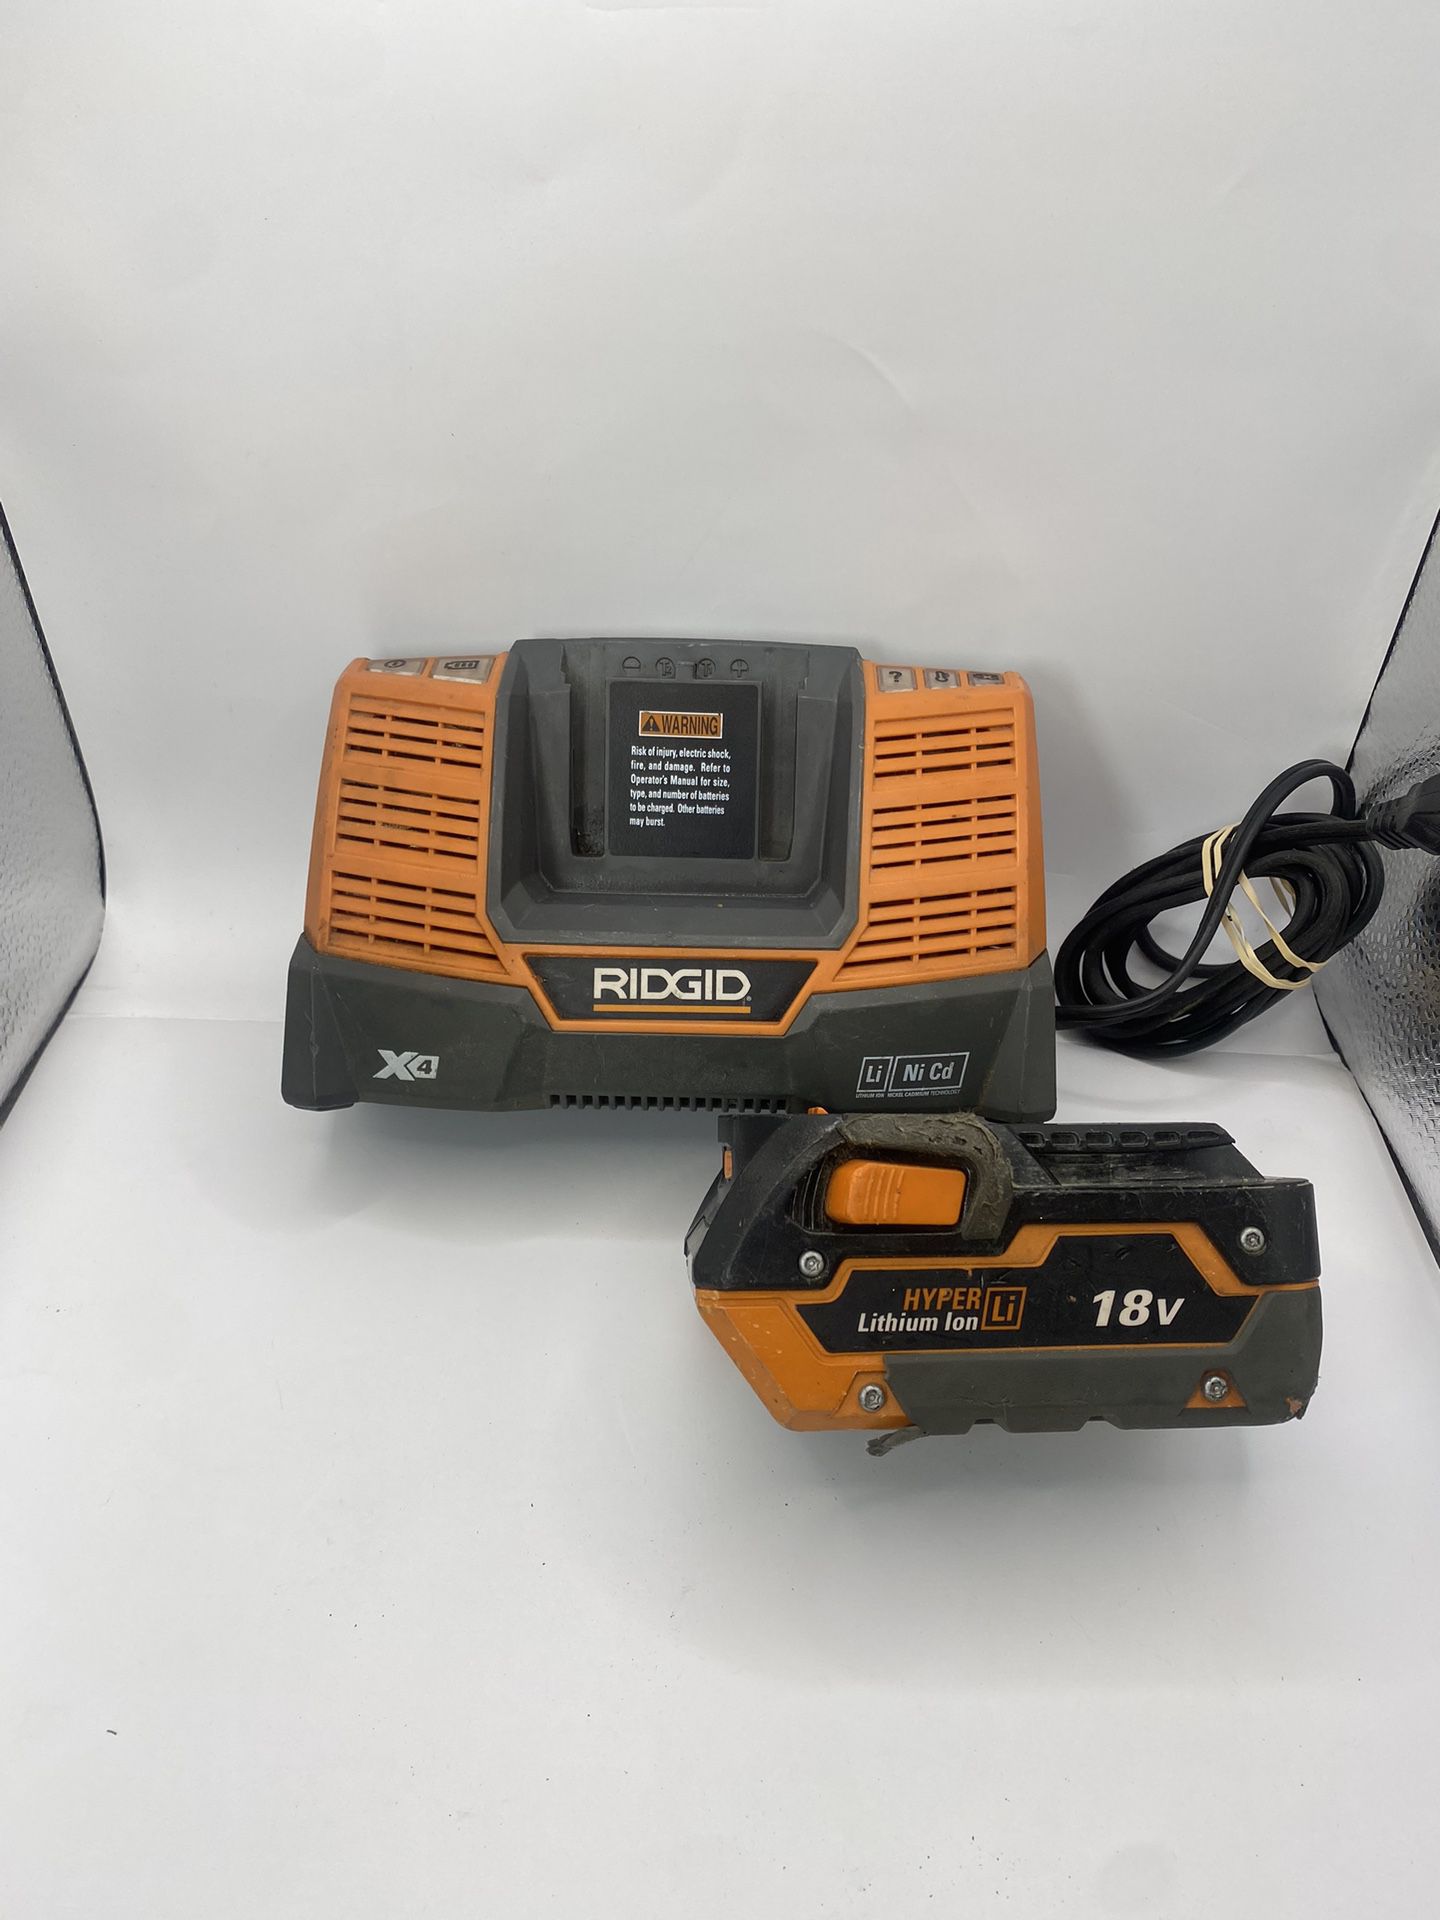 Ridgid R840093 9.6-18V Lithium Ion Battery Charger + R840085 Battery Used